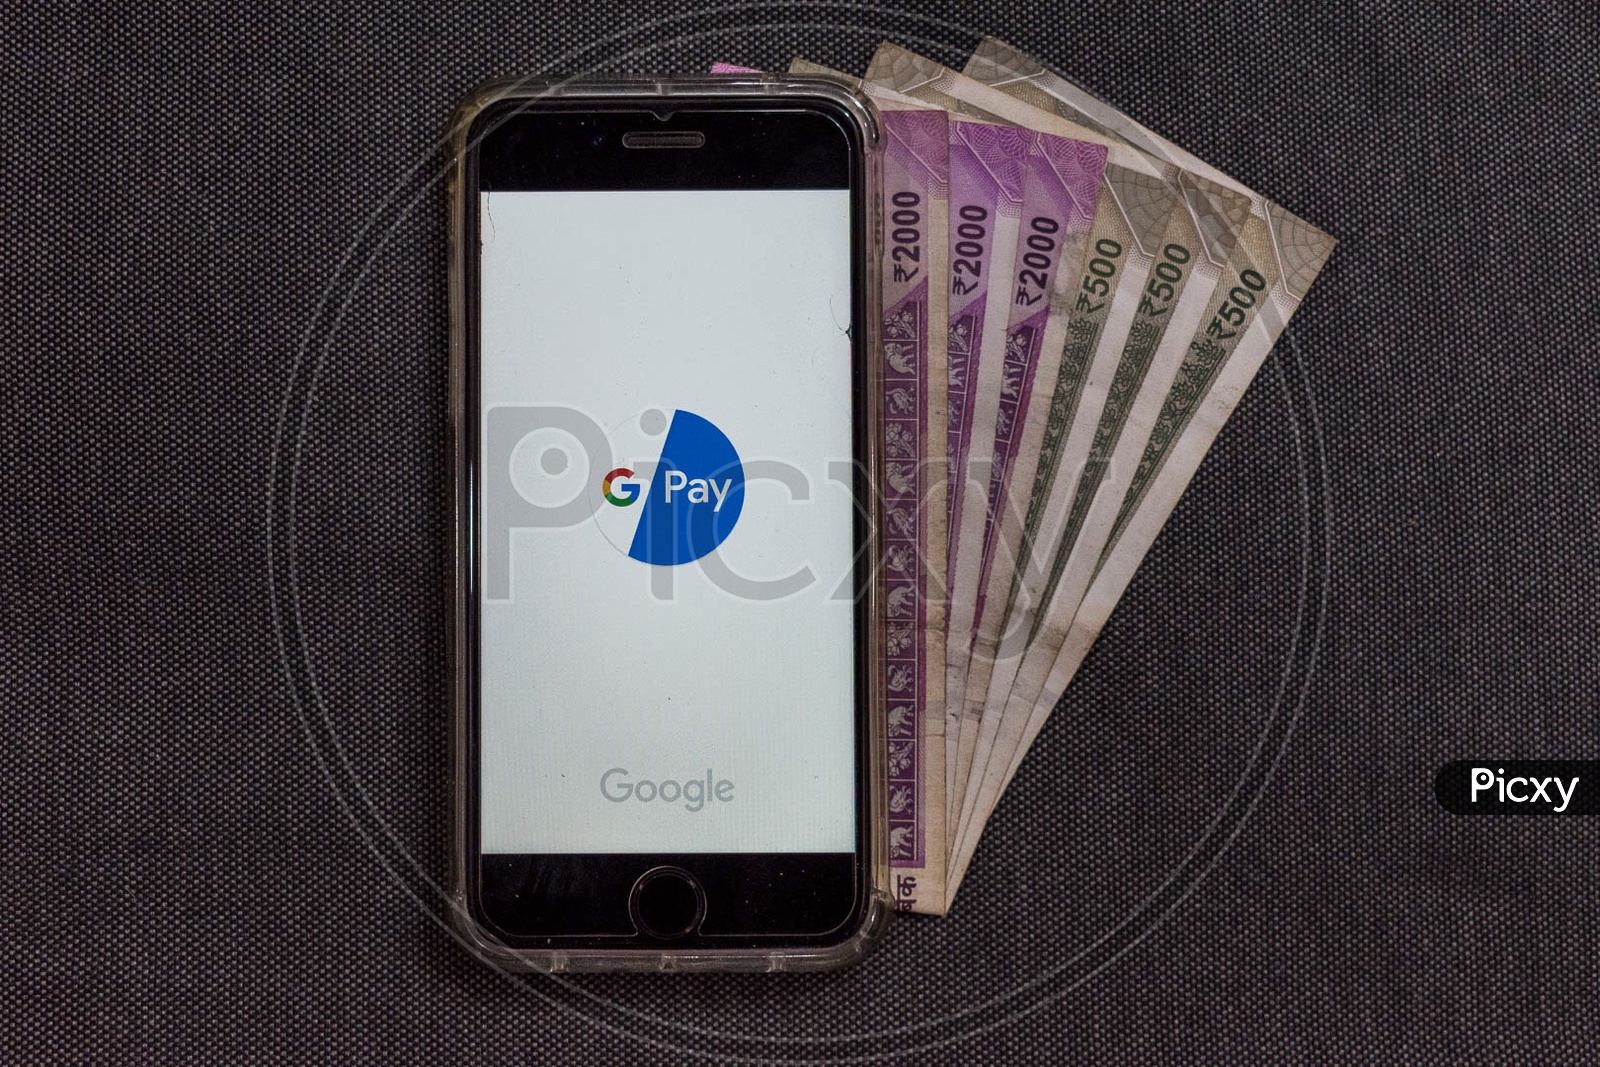 Google pay mobile payments app